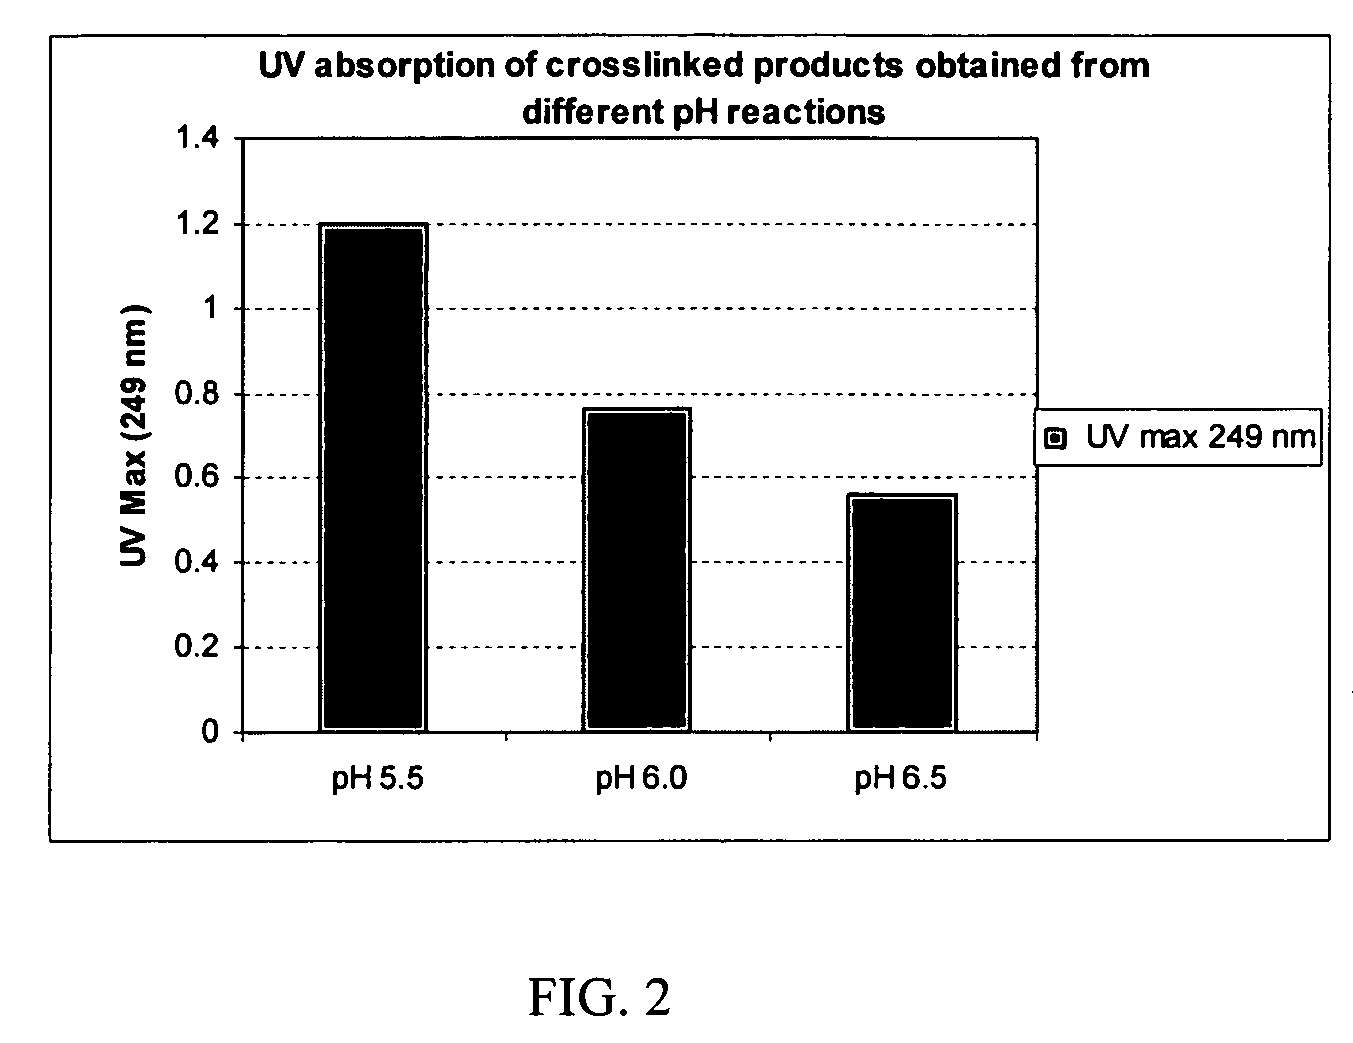 Crosslinked hyaluronic acid compositions for tissue augmentation